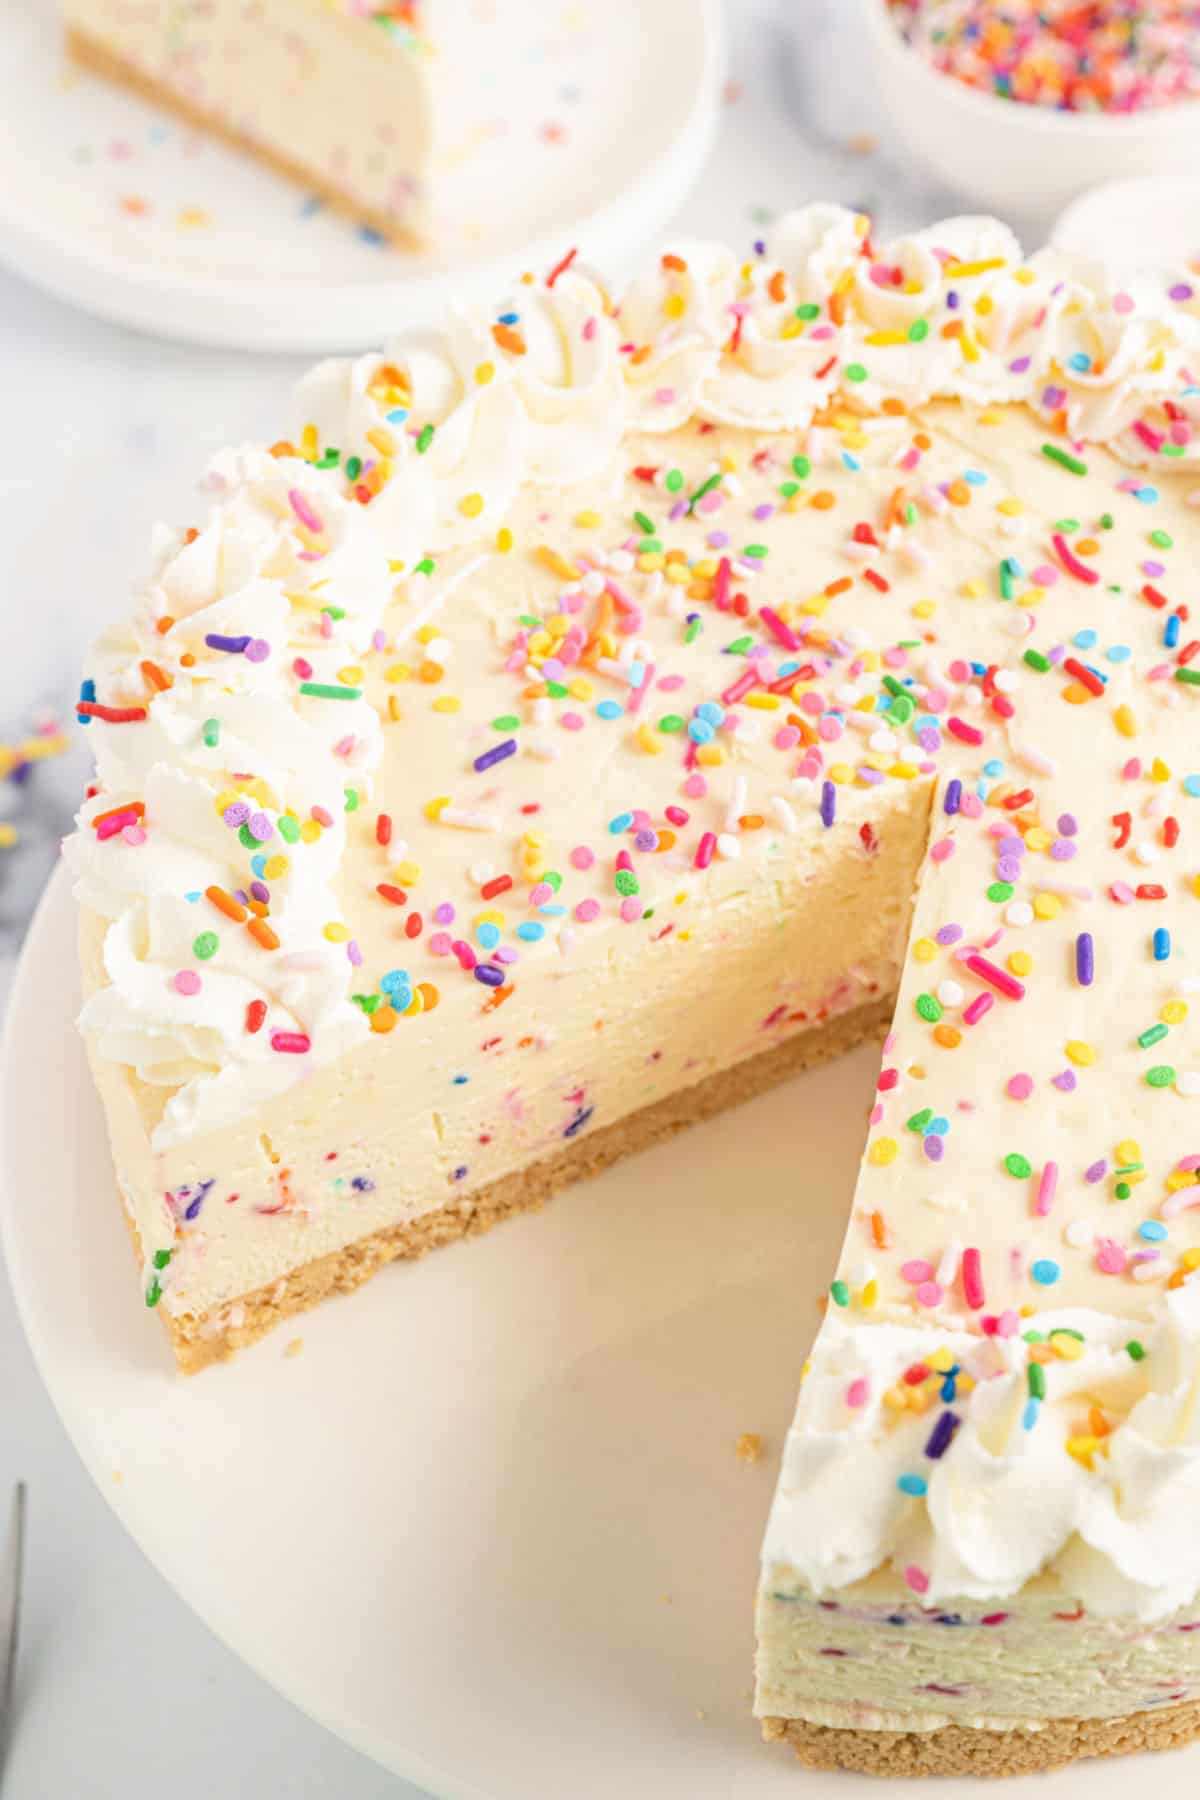 Cheesecake with sprinkles and slice removed from cake platter.